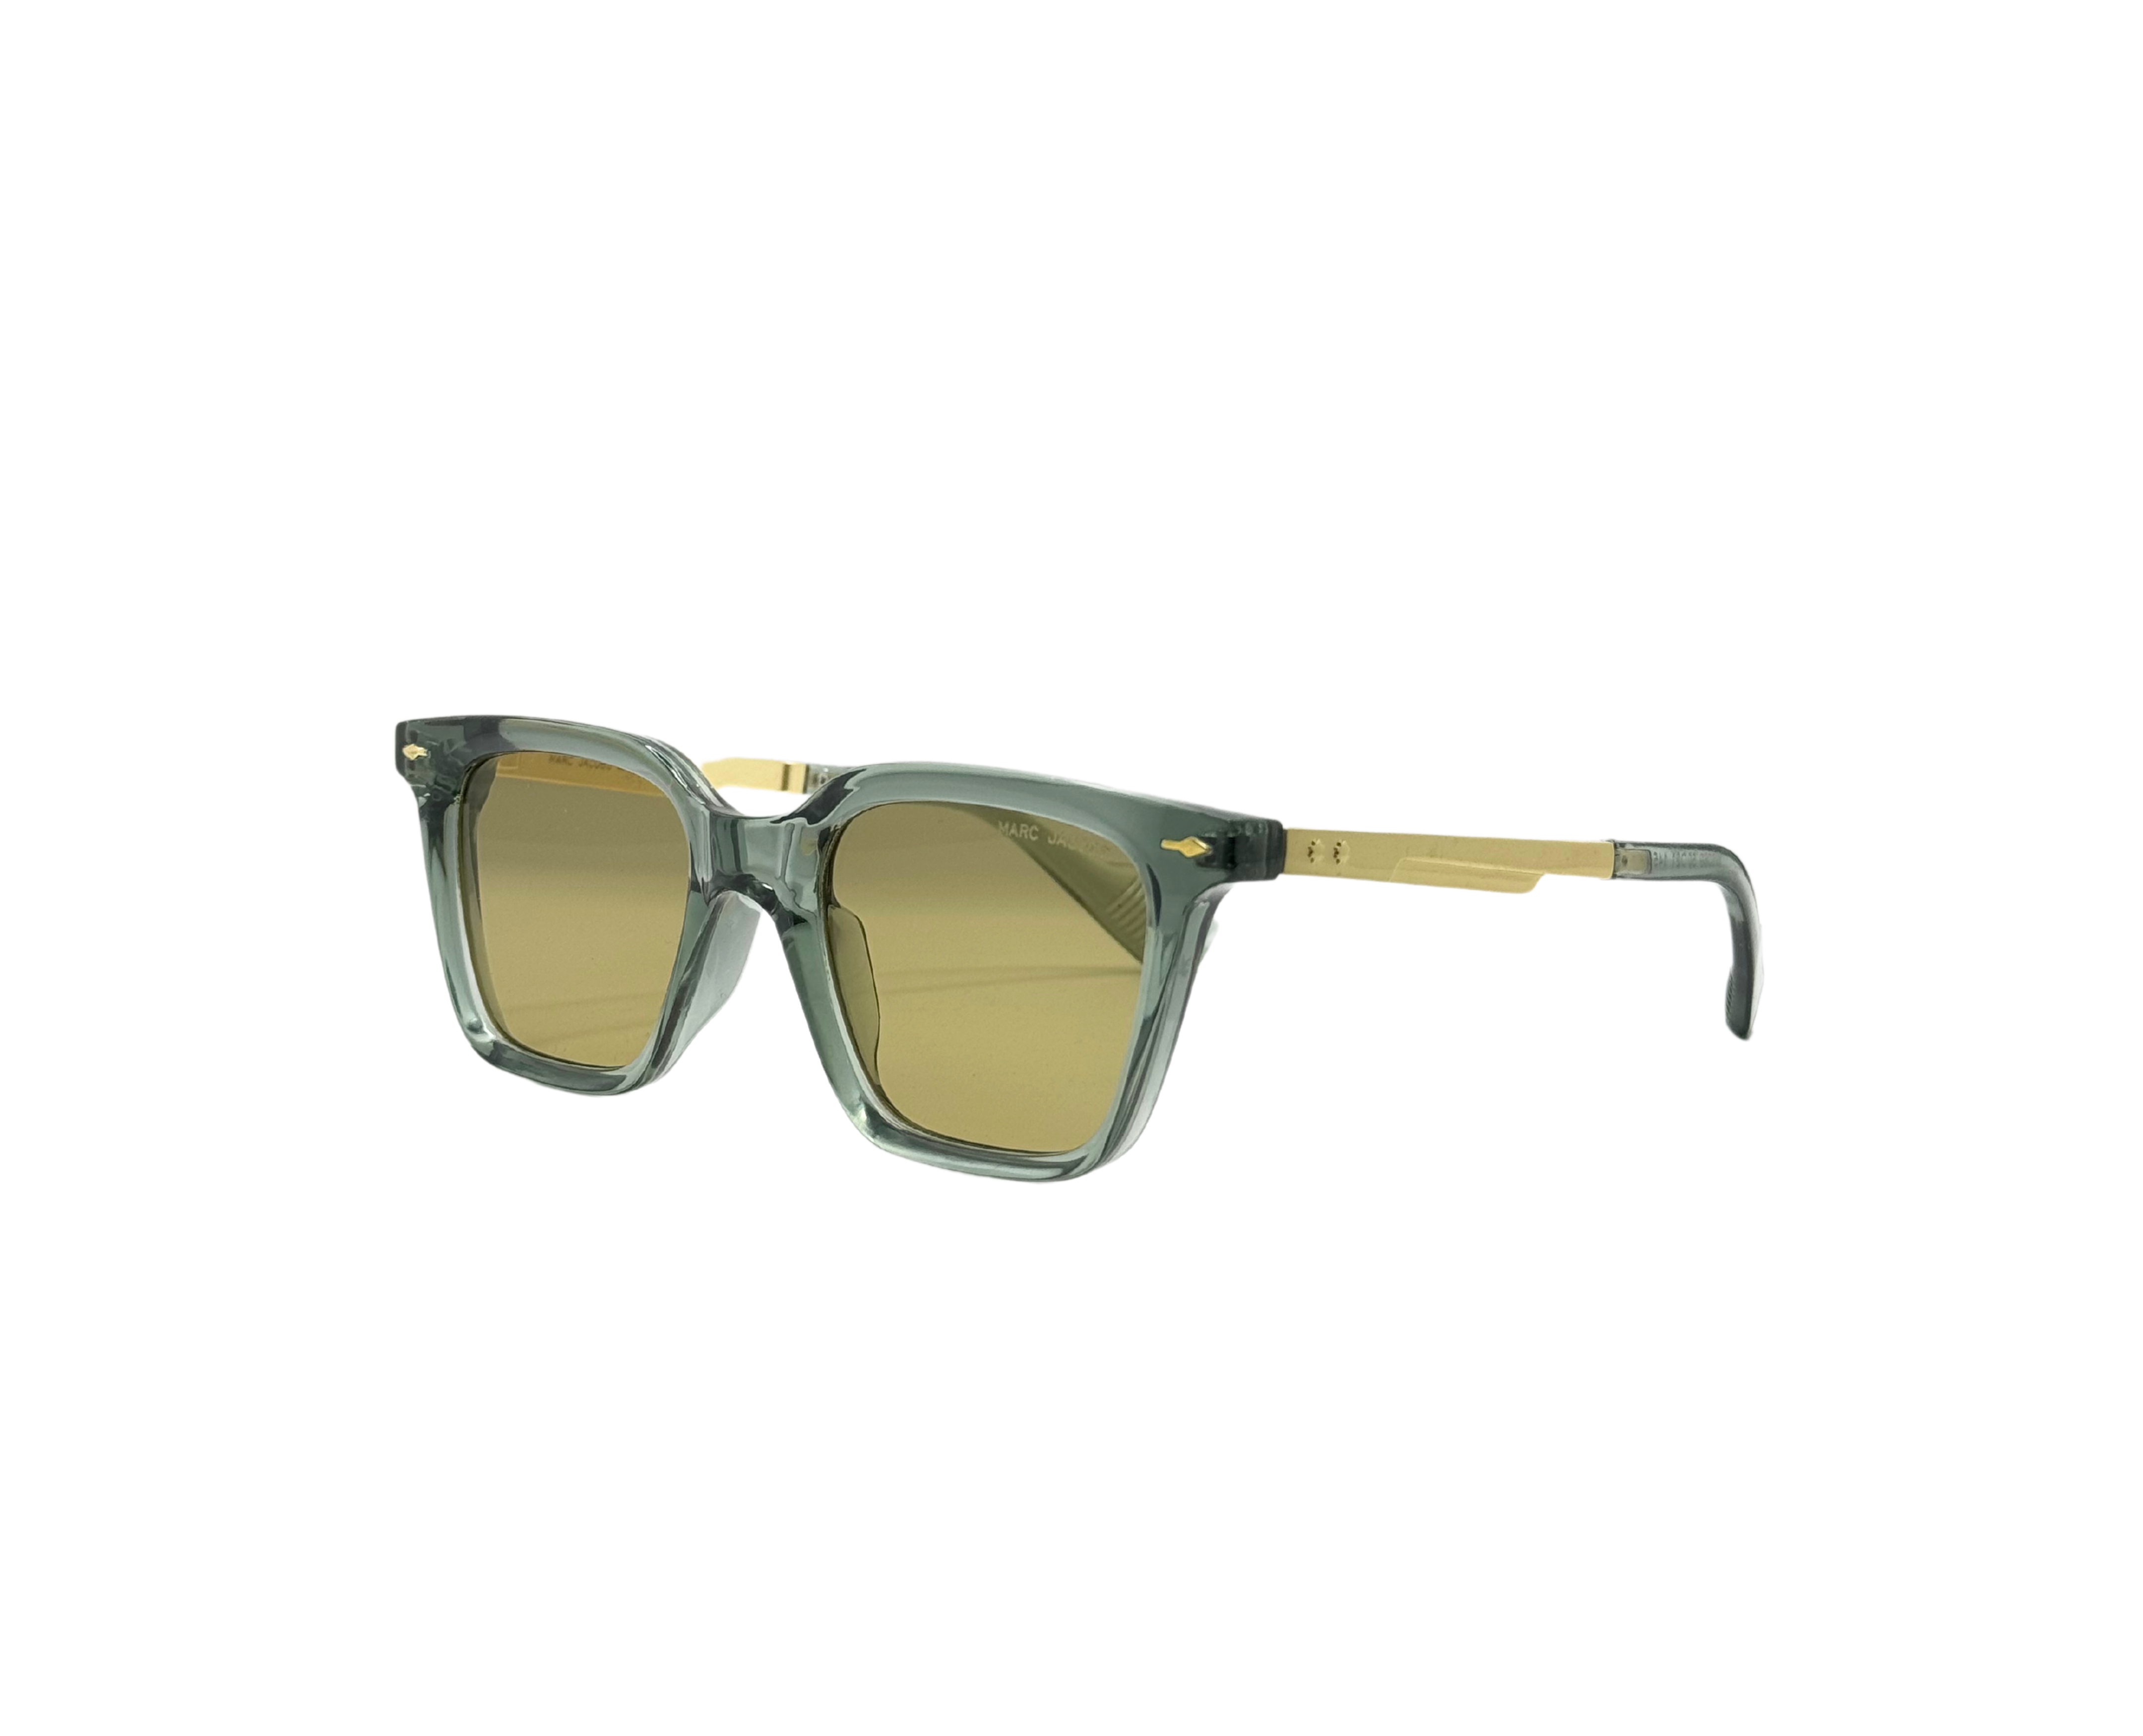 NS Deluxe - 6069 - Green - Sunglasses